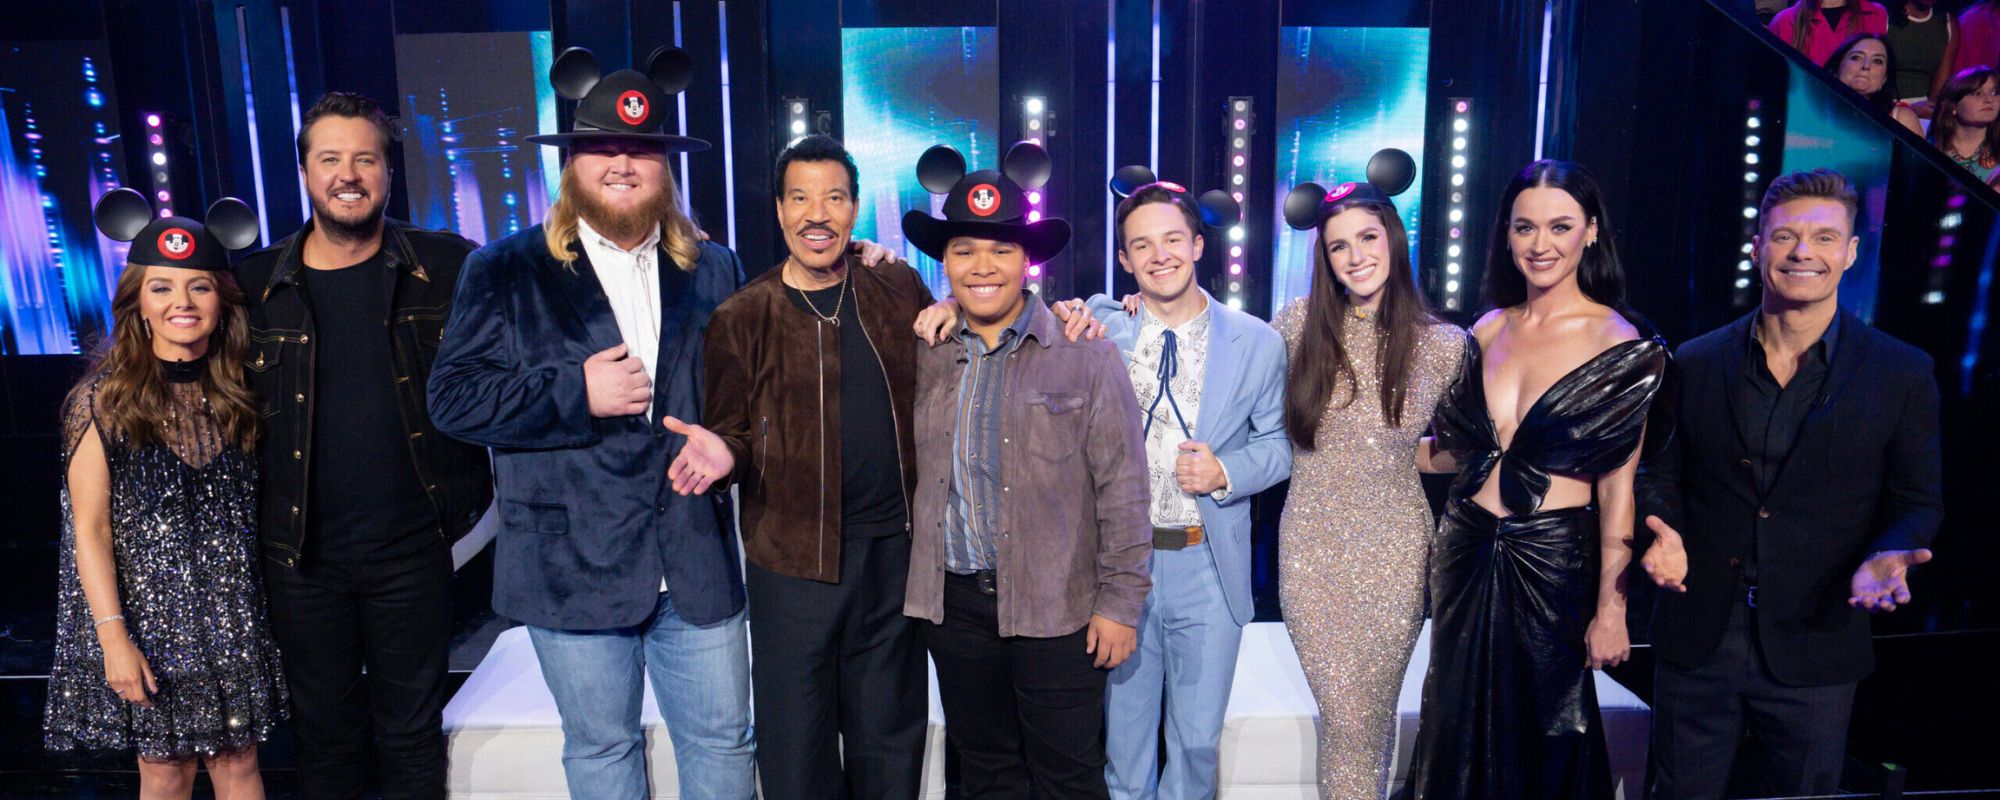 ‘American Idol’ Top 3: Who Was Eliminated? Biggest Snubs and Fan Reactions